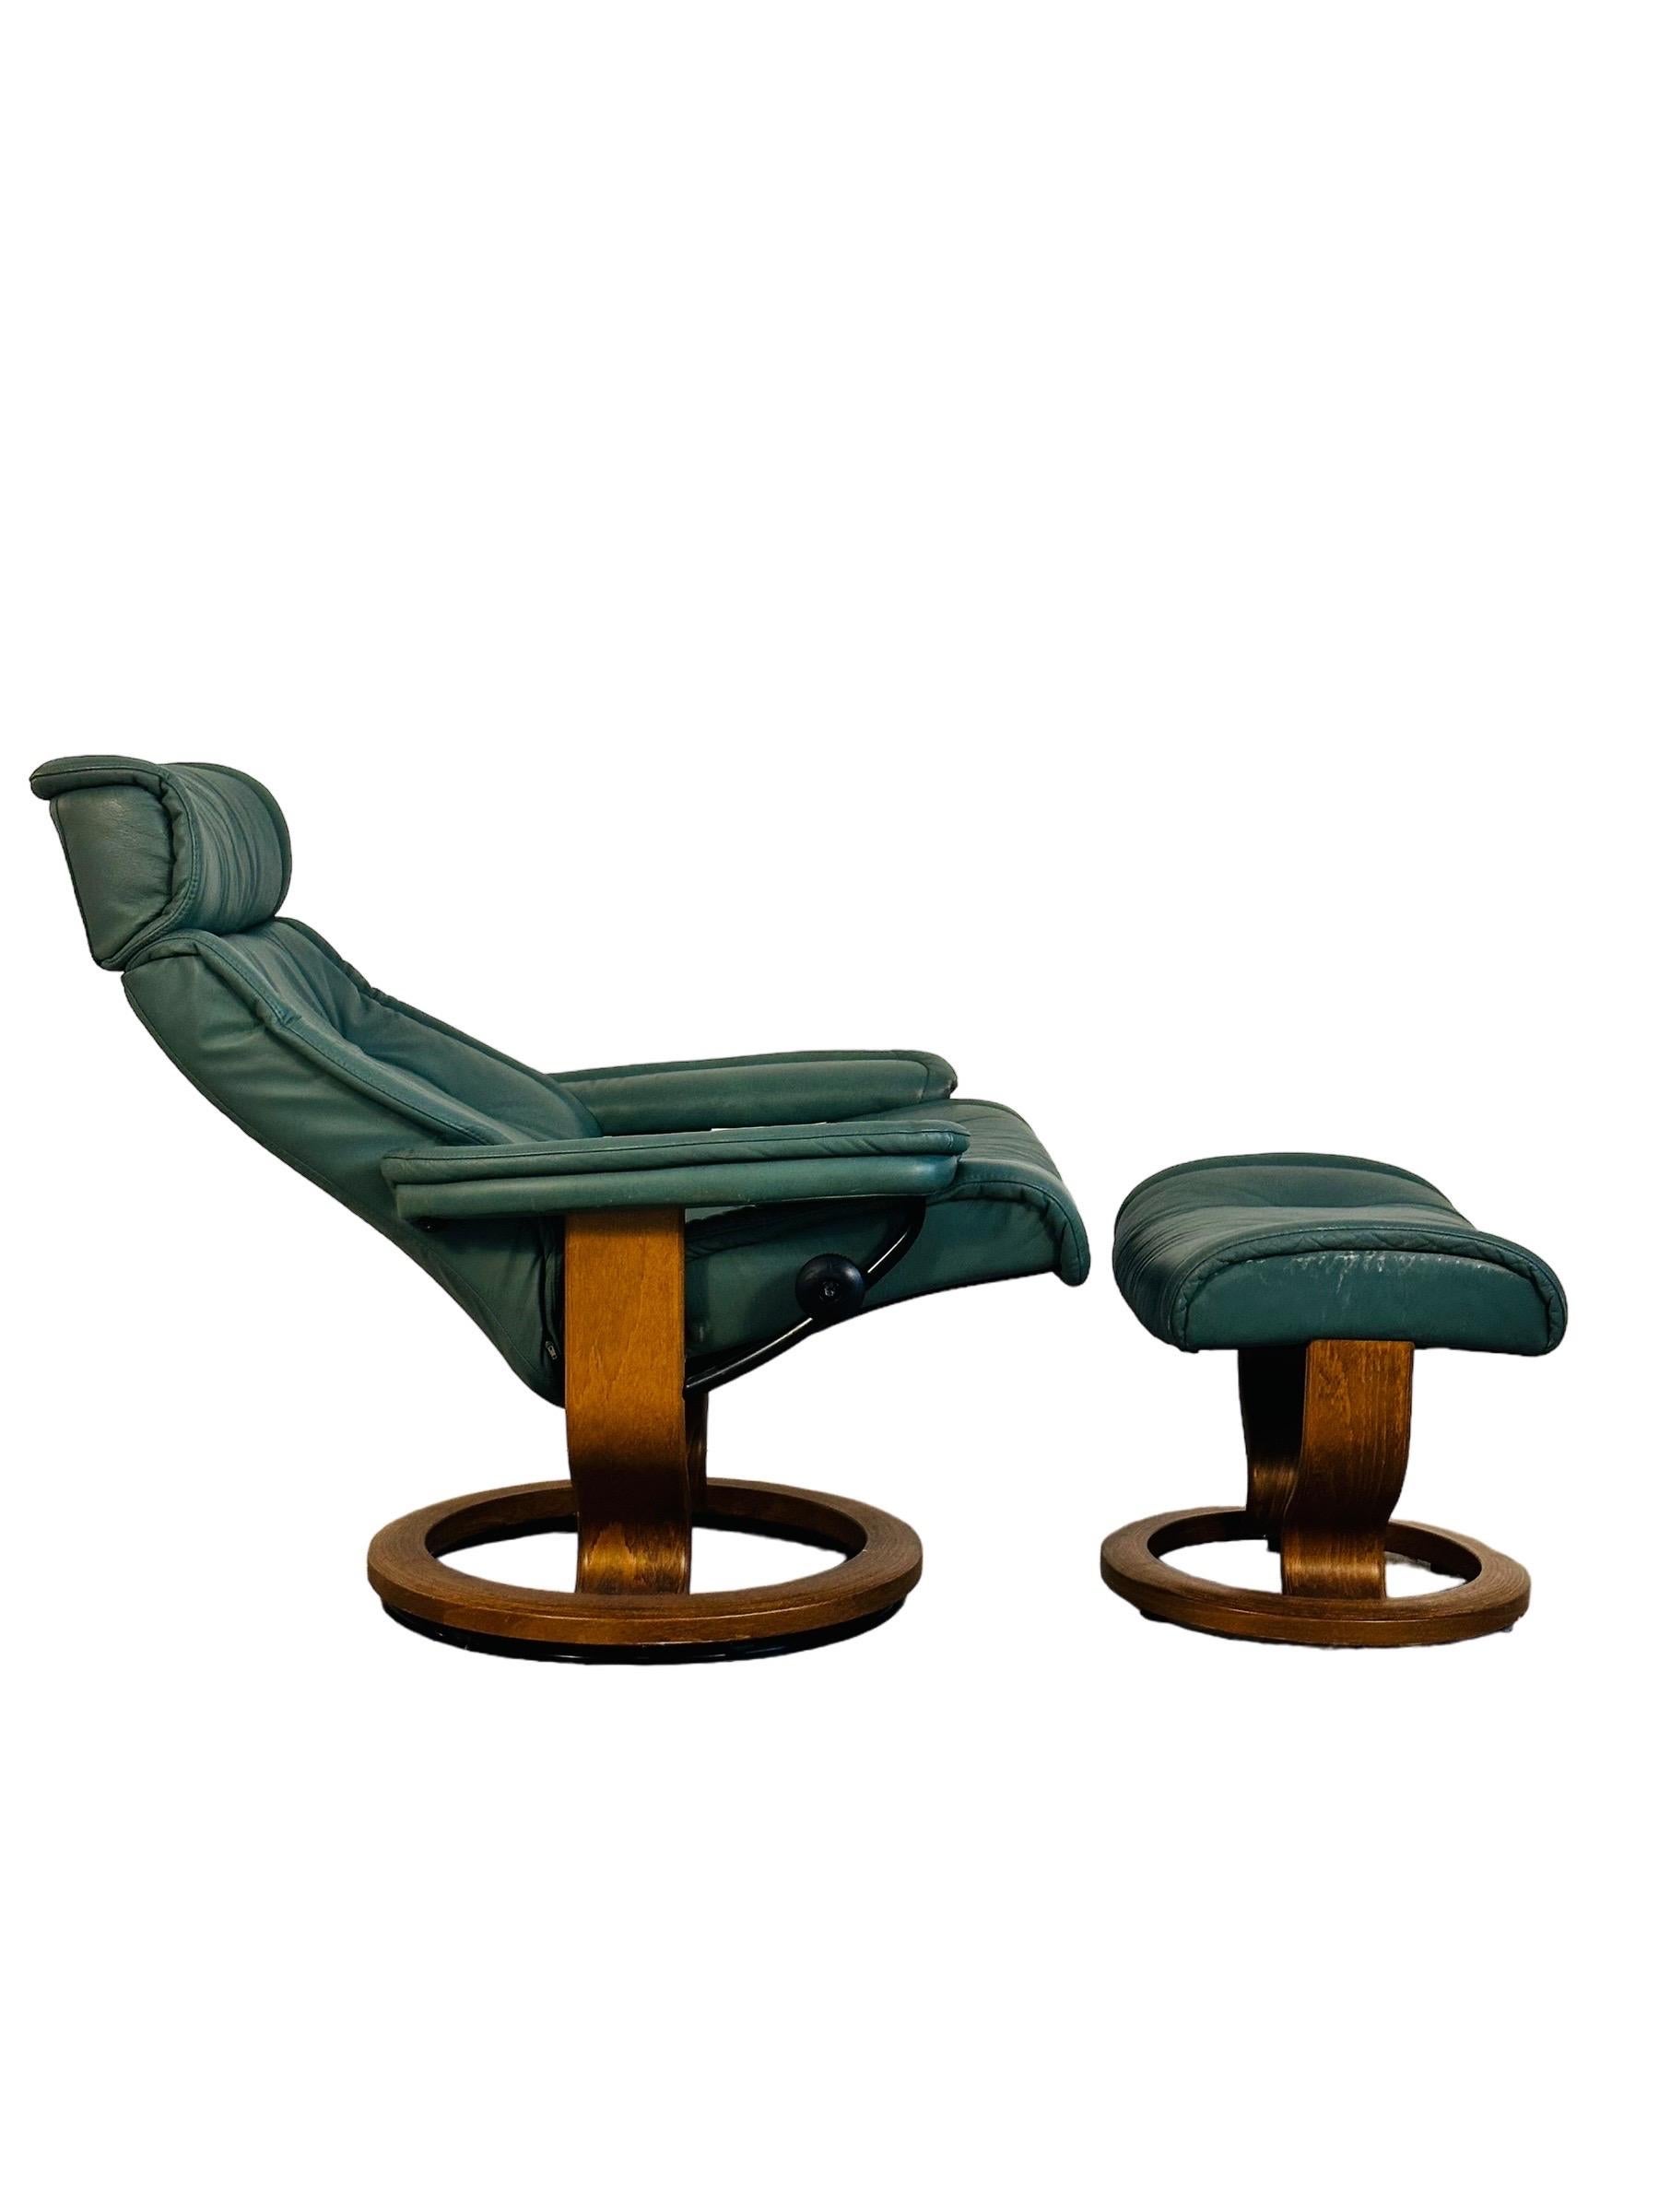 Step up your relaxation game with this eye-catching green Ekornes lounge chair and ottoman! It's not just a chair, it's your new favorite spot. With an adjustable headrest and the ability to swivel and recline, it's like a first-class seat in your